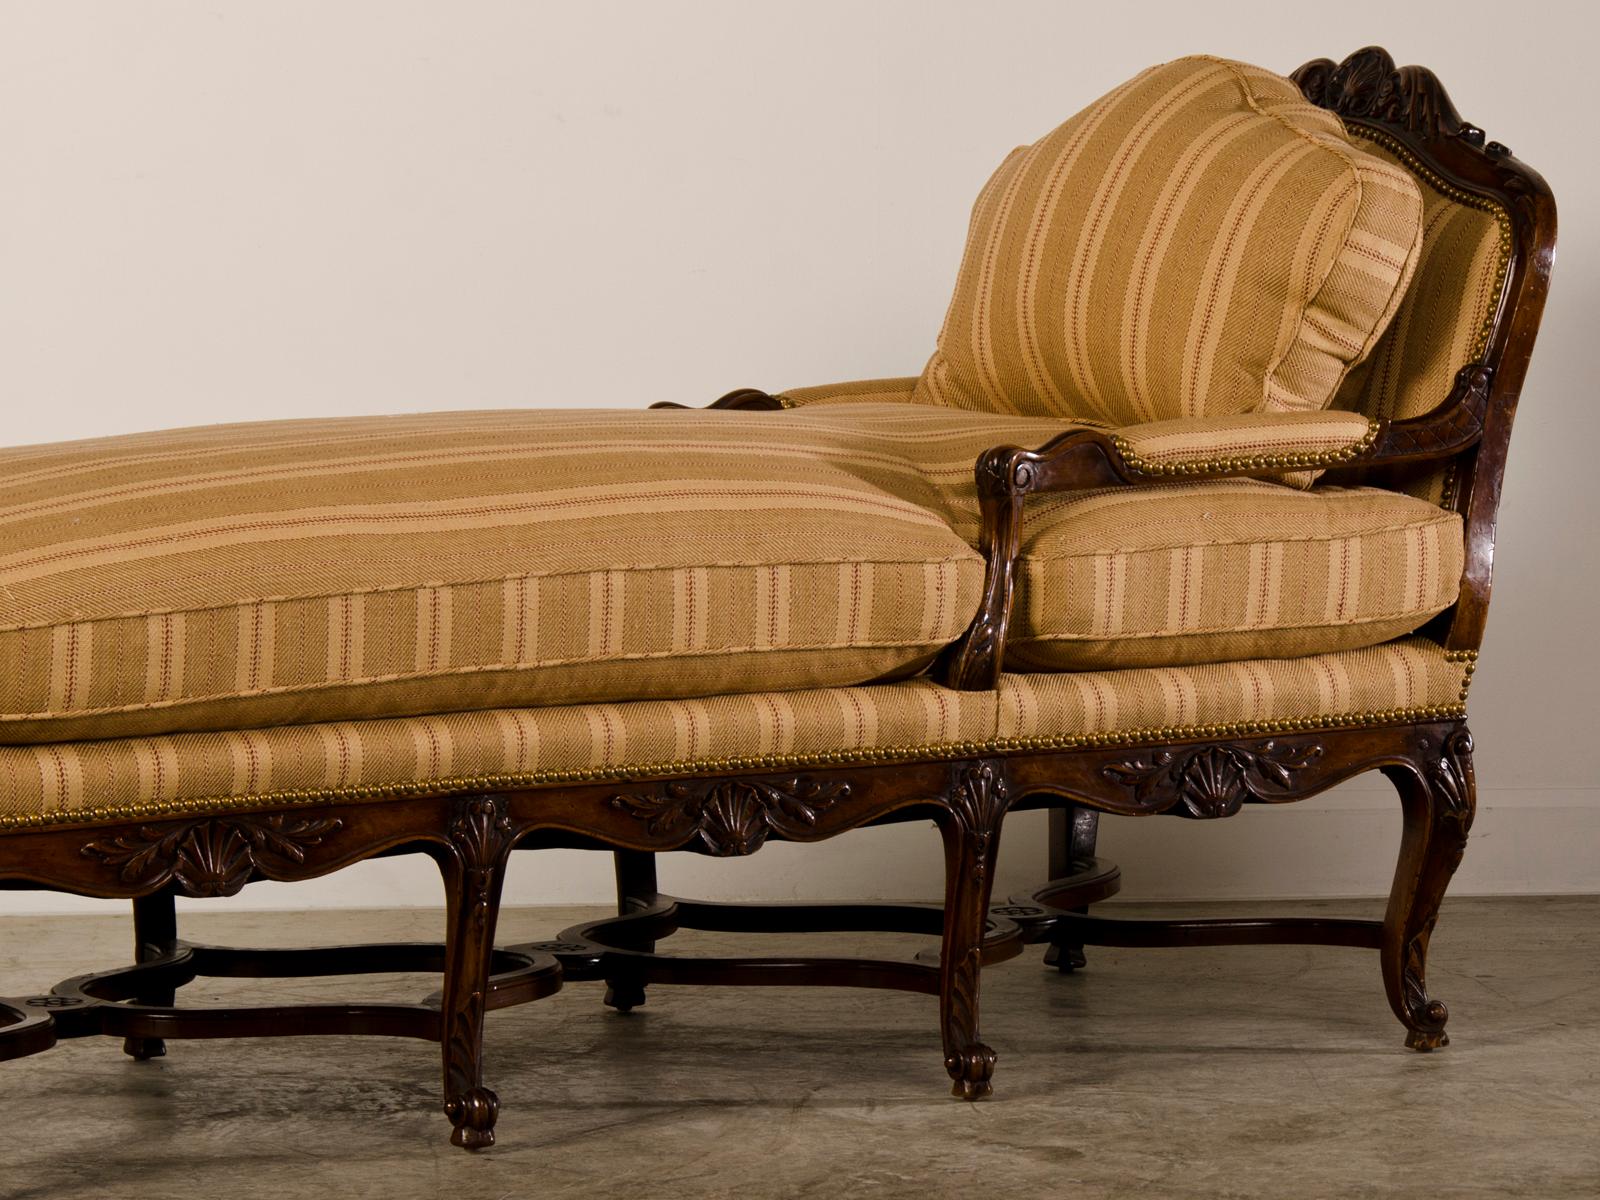 Louis XV Antique French Régence Period Carved Walnut Chaise Lounge, circa 1720 For Sale